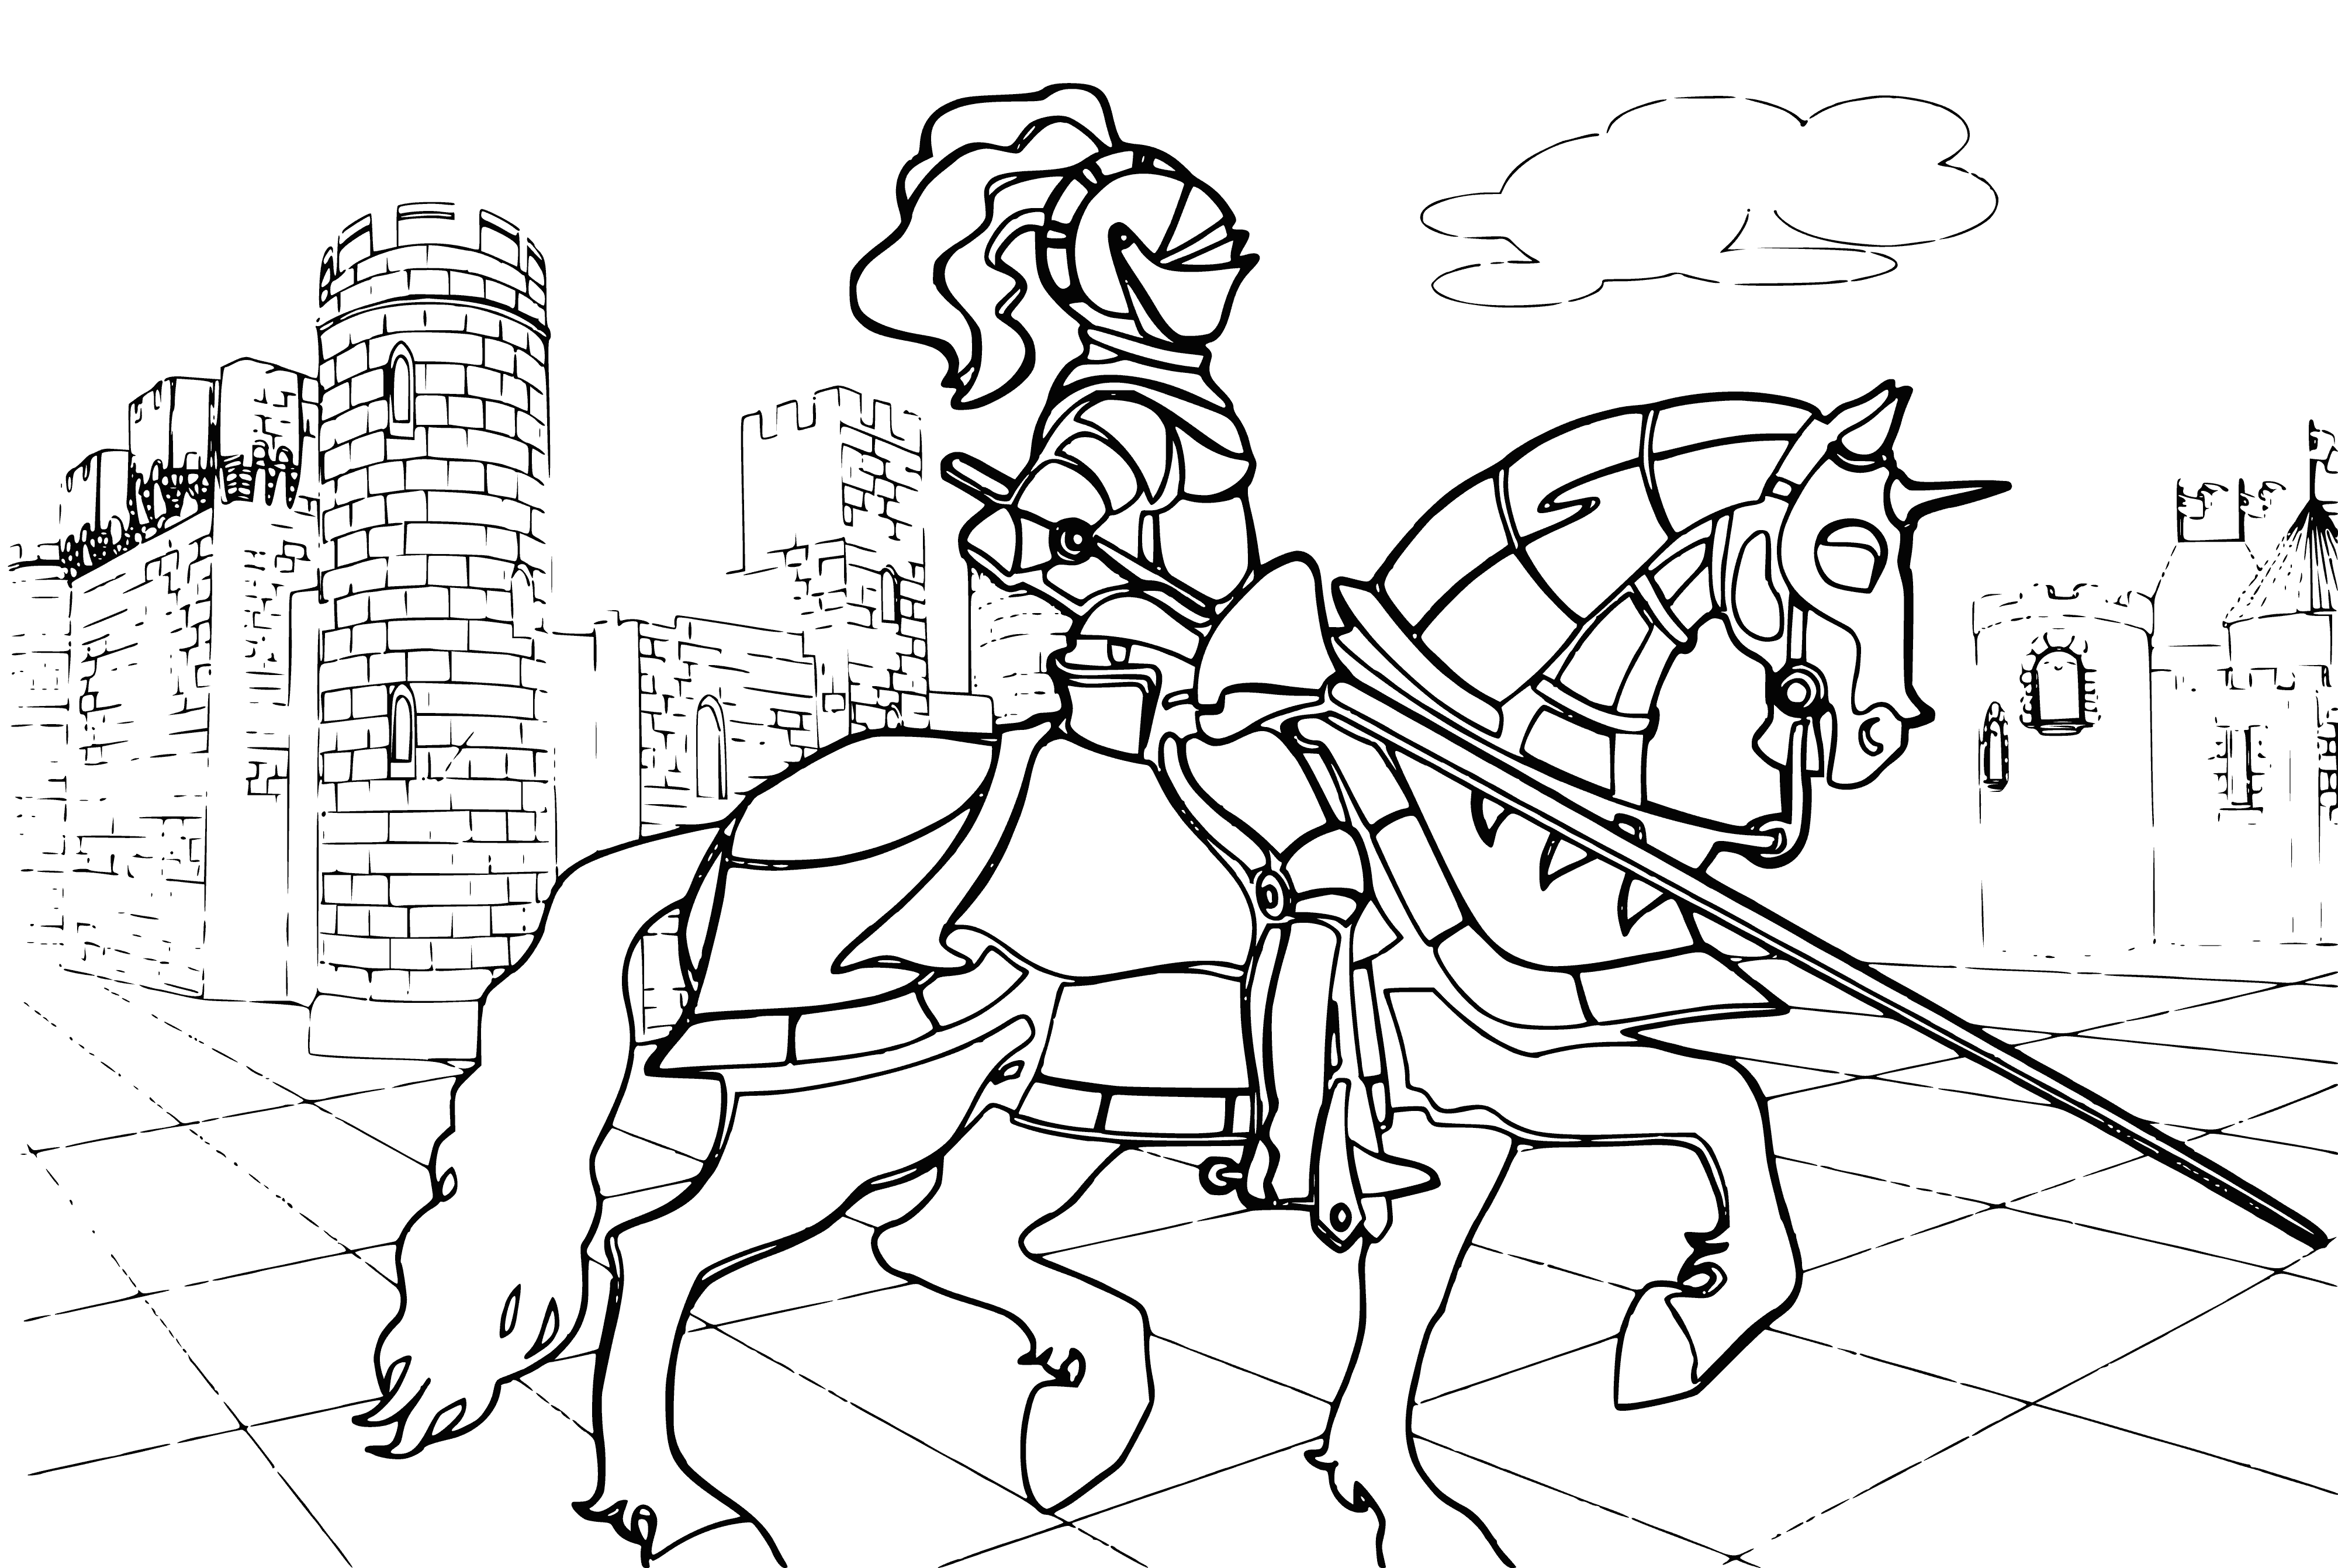 coloring page: Warriors charging towards viewer on horseback in shining armor, wielding swords. Castle looms in background and blue sky above. Heading forward in glorious battle! #medieval #castle #warriors